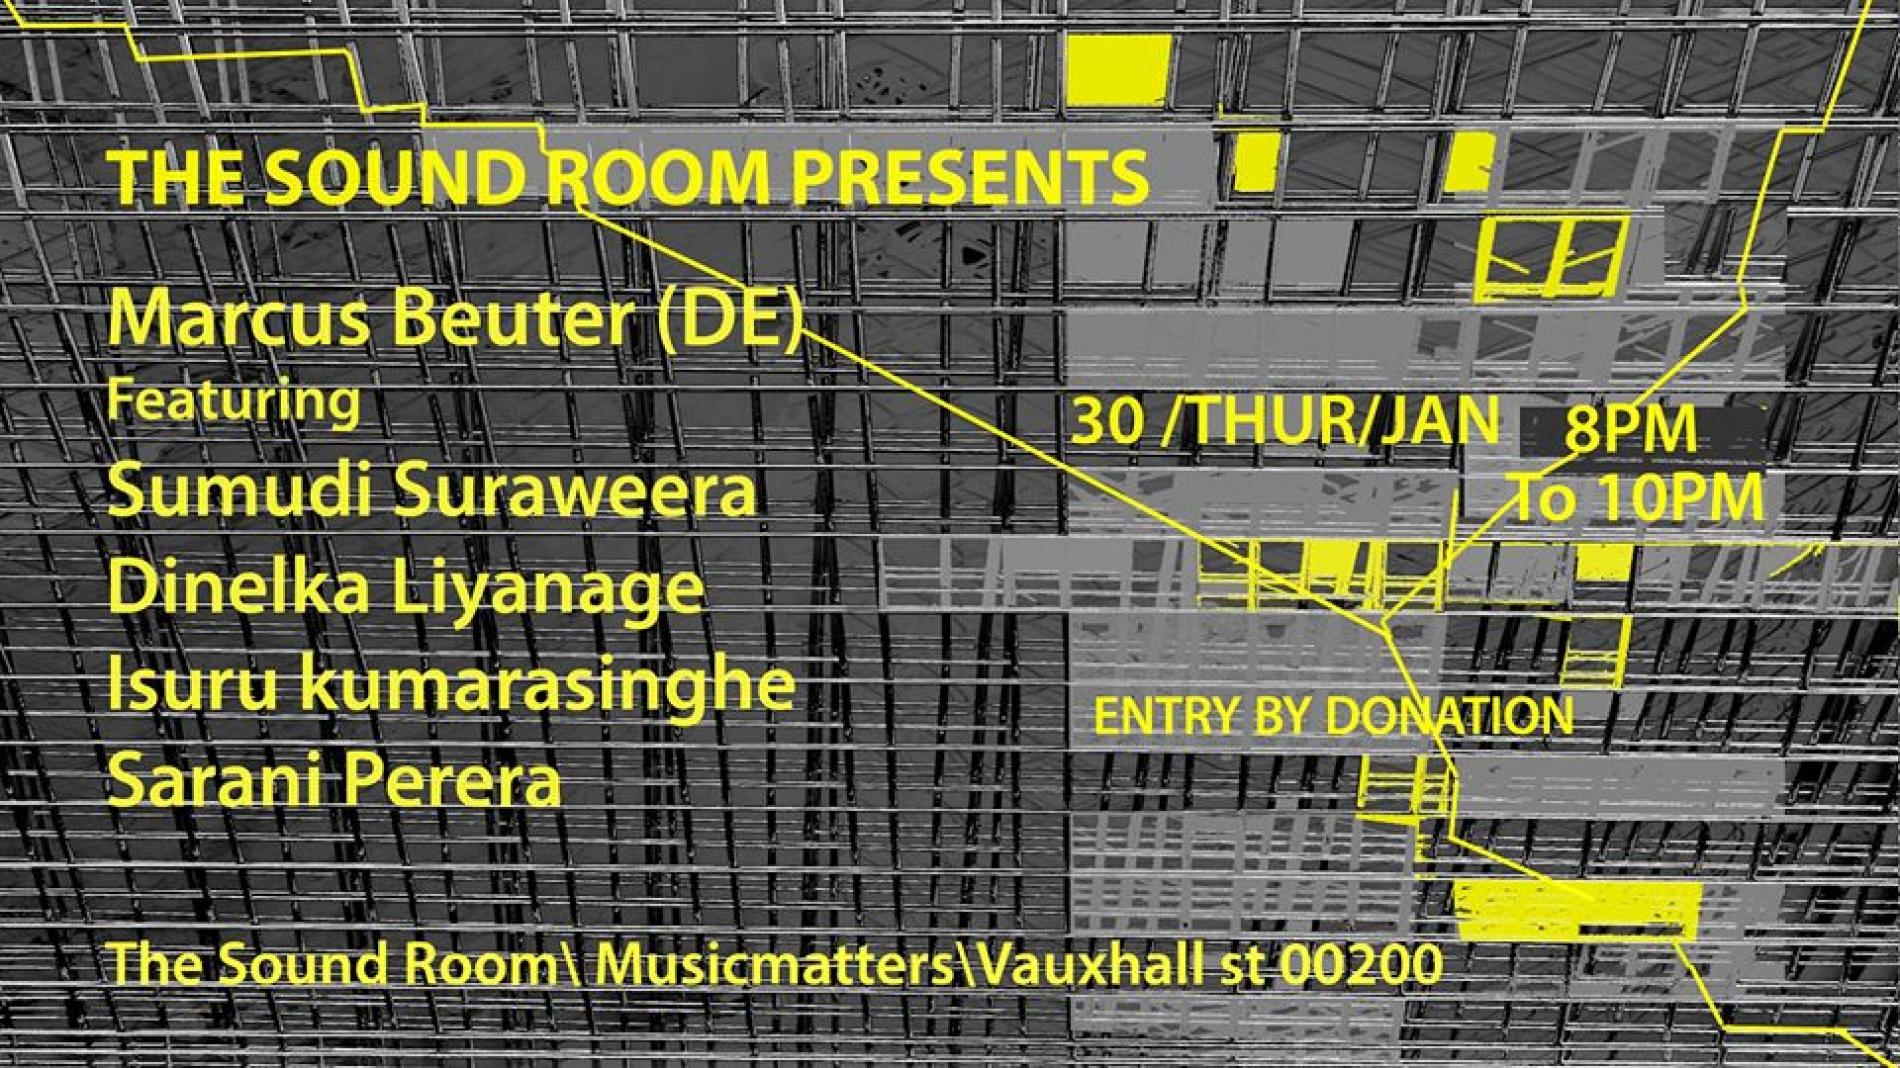 The Sound Room Presents Marcus Beuter